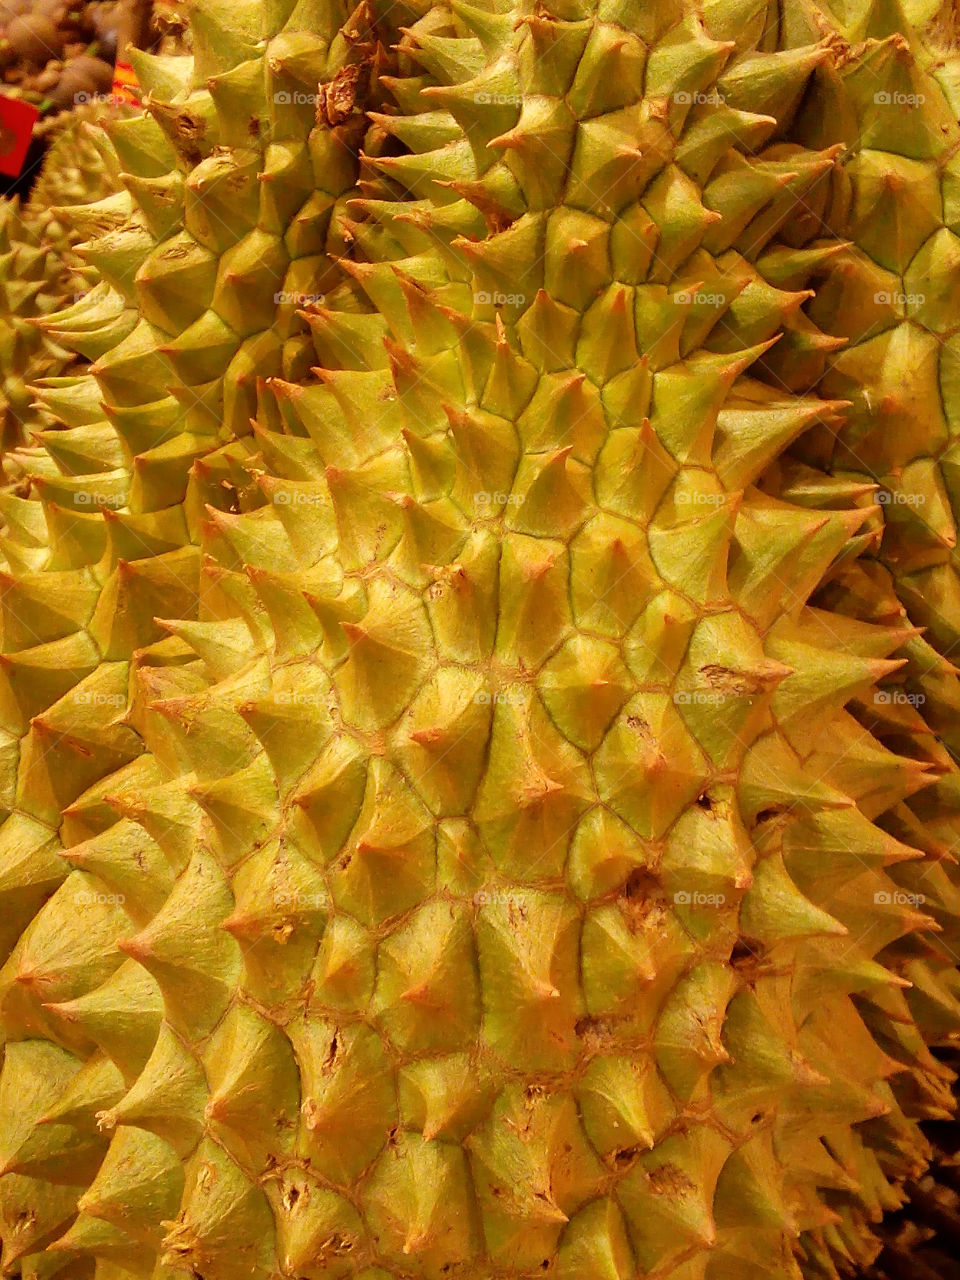 durian. regarded by many people in southeast asia as the "king of fruit"